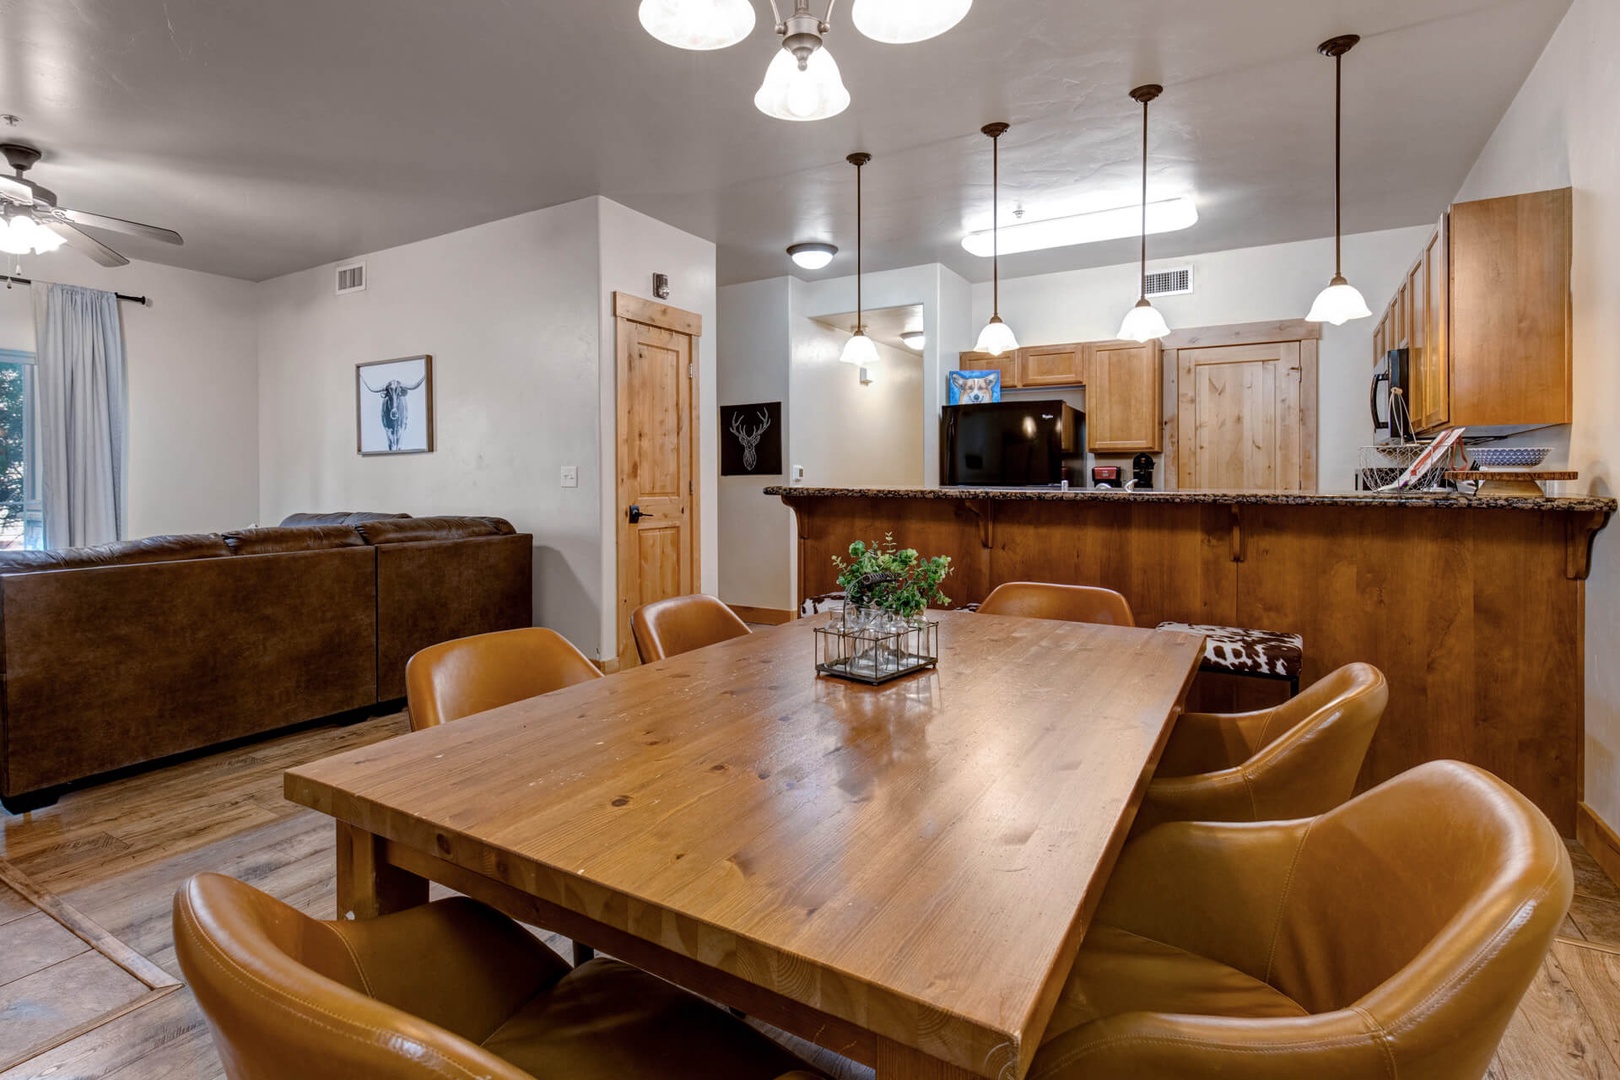 Bear Hollow Lodges 1104:  Eating at the table or serving from the bar is perfect for gathering and games.